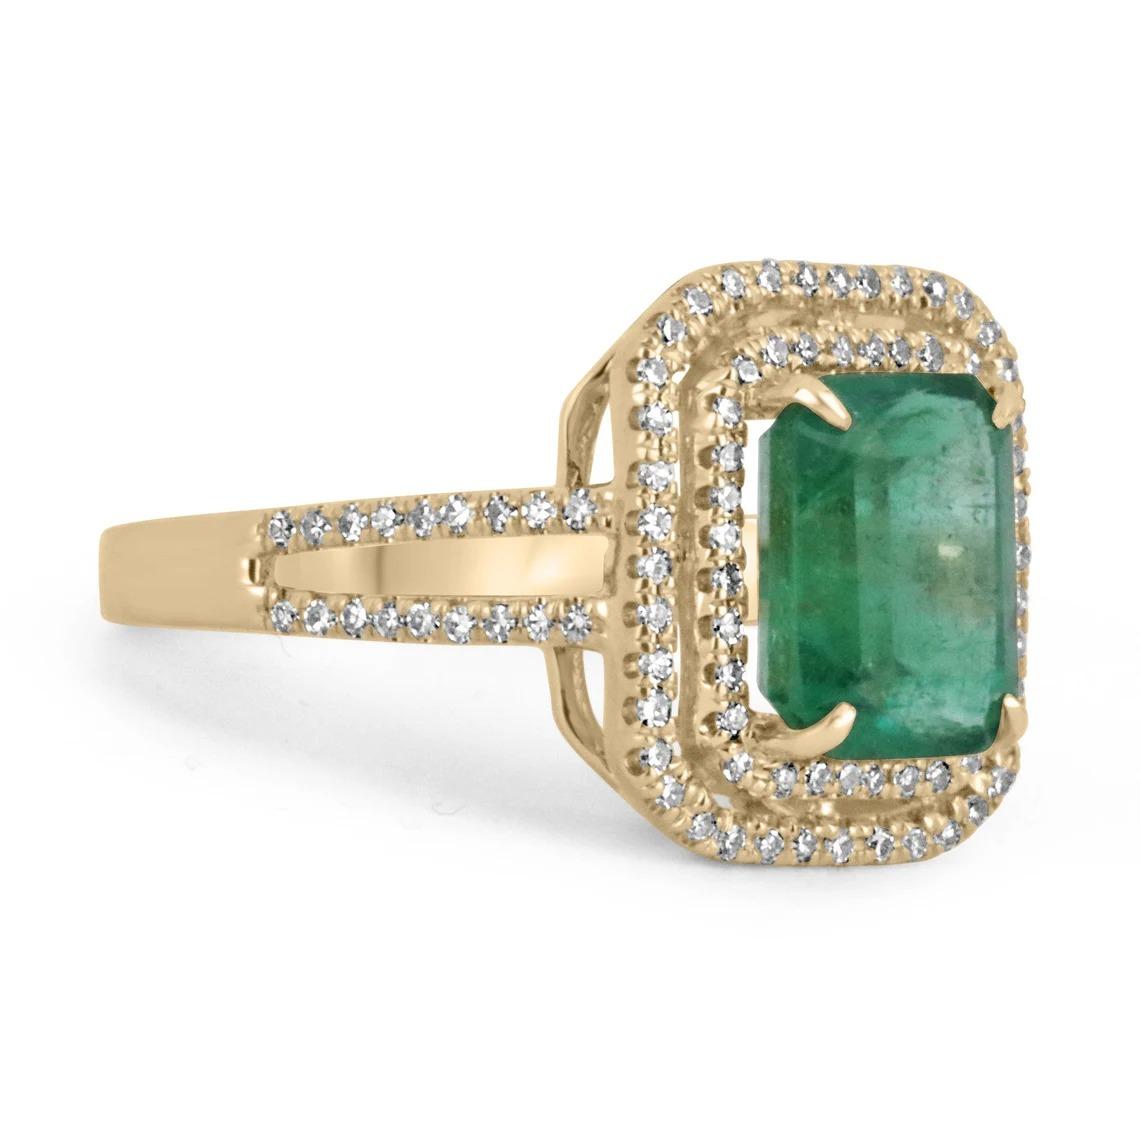 Featured is a stunning emerald and diamond ring. The center gemstone showcases a beautiful 2.92-carat, natural emerald cut emerald from the origin of Zambia. Displaying a gorgeous and lush dark green color, with a yellow hue to it. Surrounding this